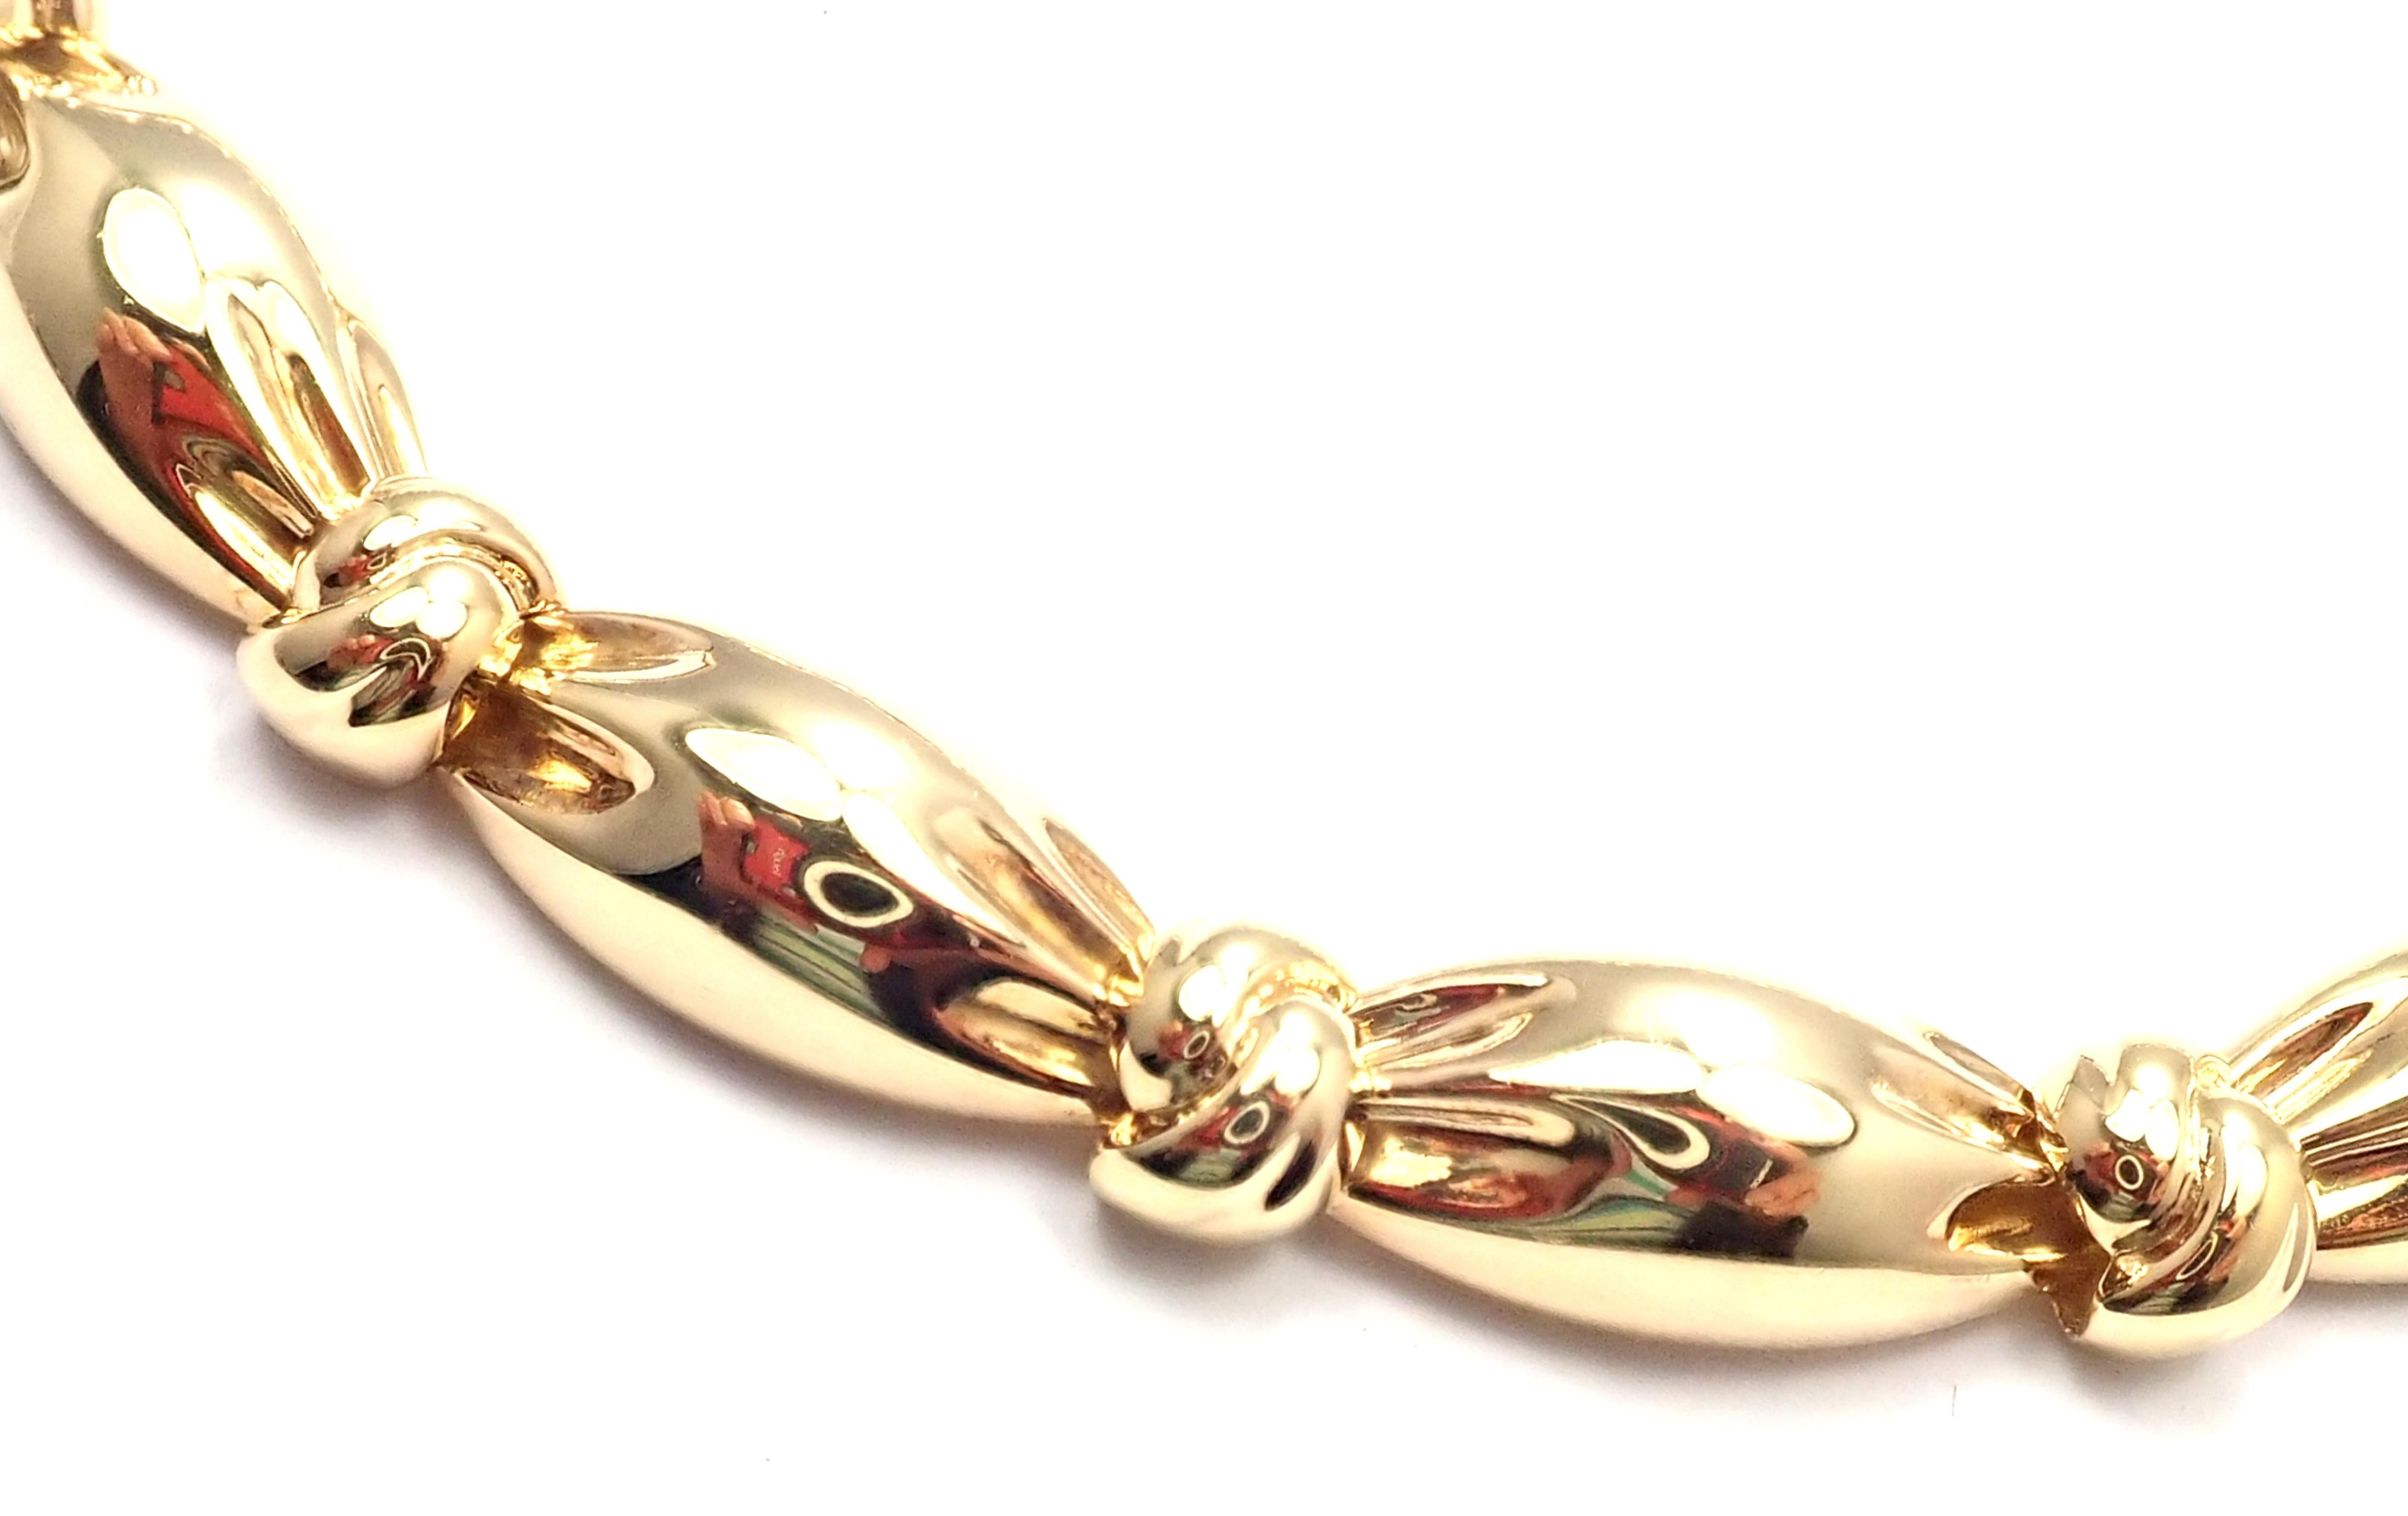 18k Yellow Gold Knotted Link Chocker Necklace by Van Cleef & Arpels. 
Details: 
Length: 15.25